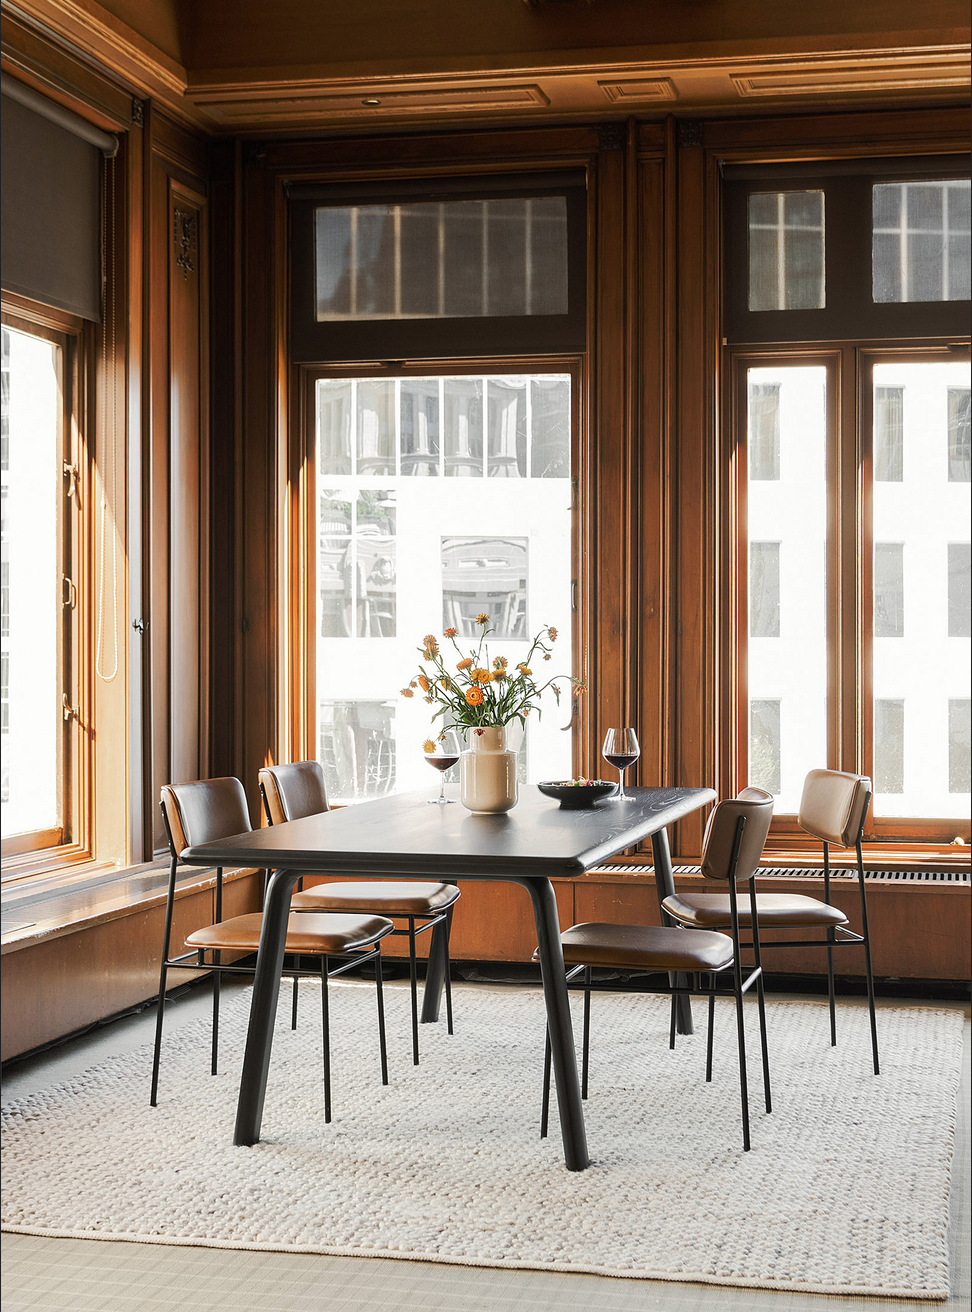 Dining room with high ceiling and large windows, dark woodwork, rectangular wooden table and retro brown leather chairs, textured carpeting